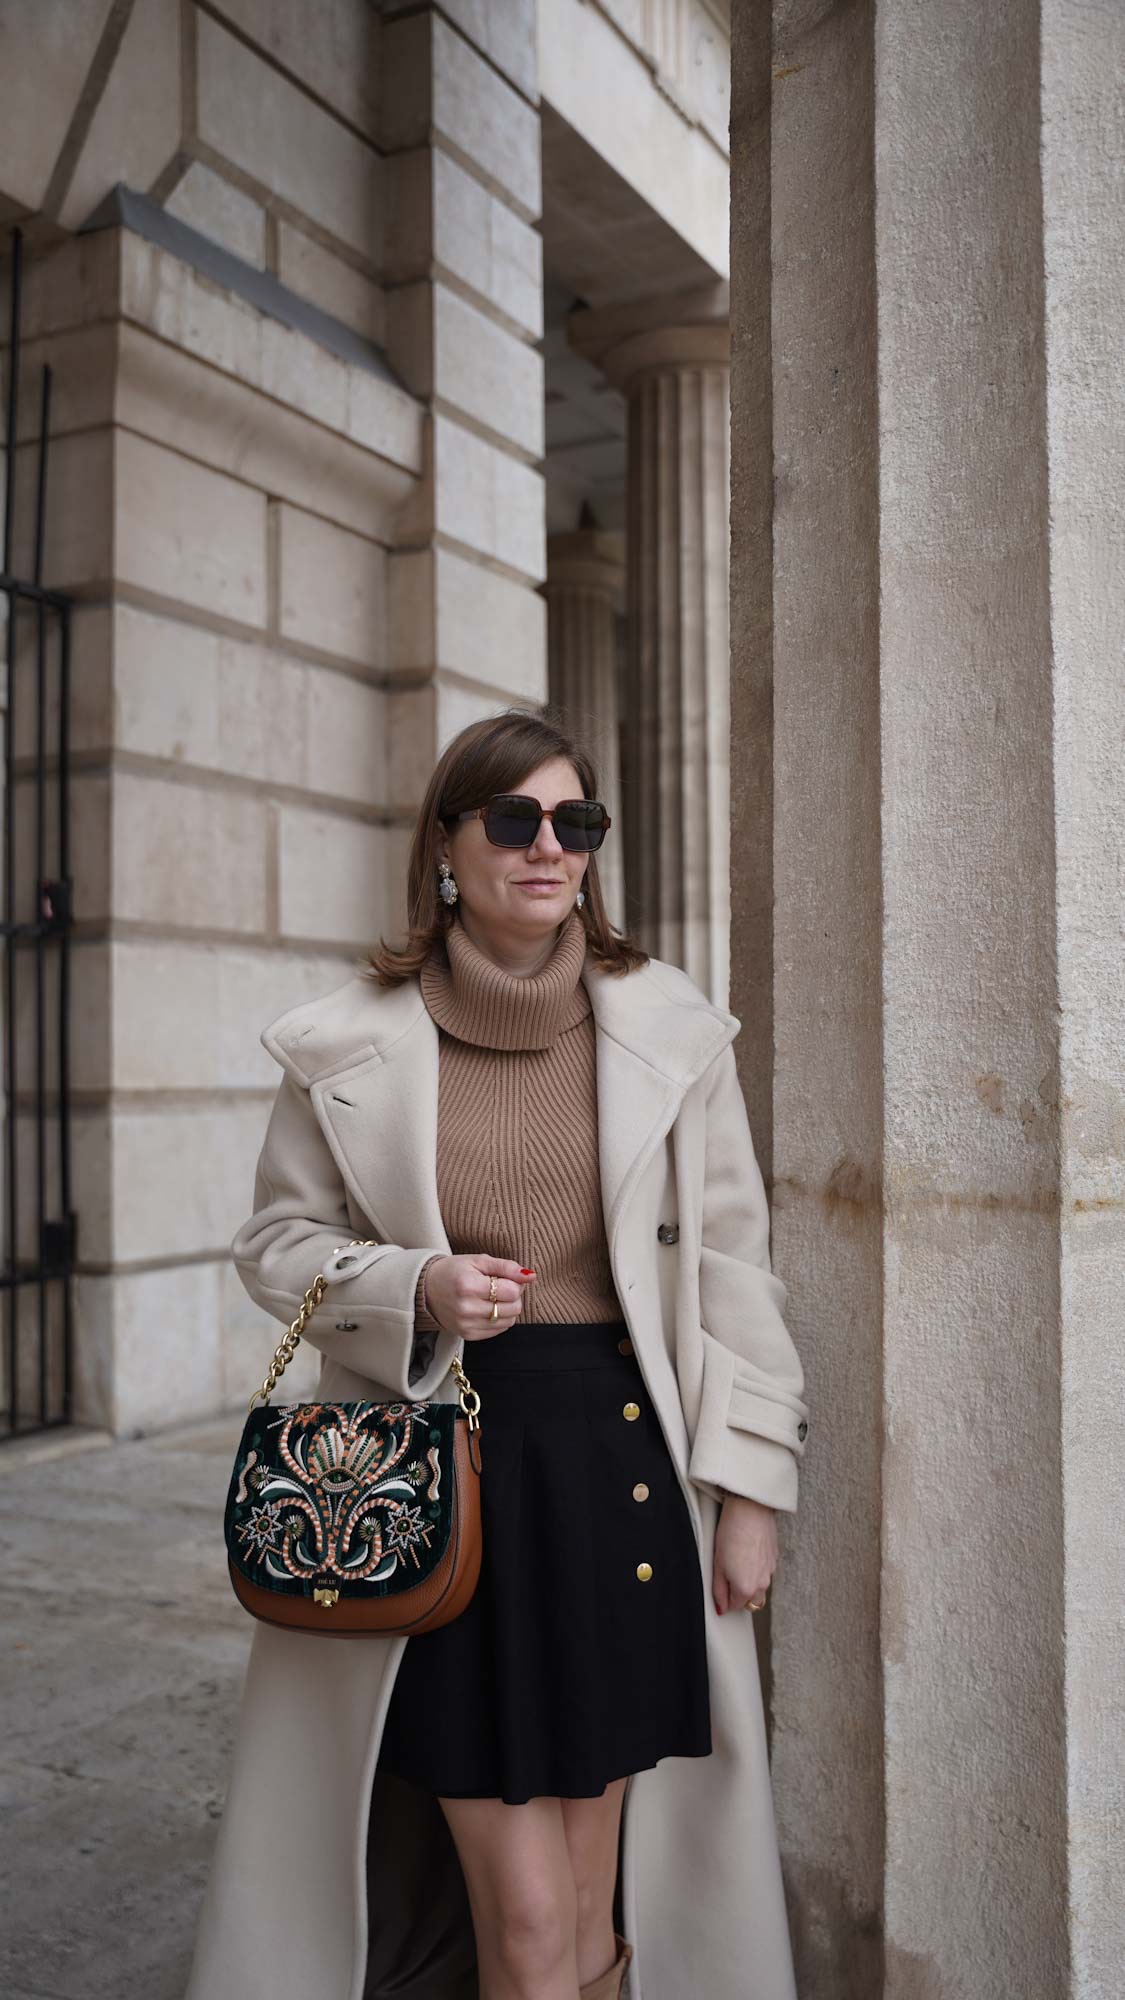 Maschalina pearl earrings, winter outfit, beige coat, mango coat, turtleneck sweater, casual chic outfit 